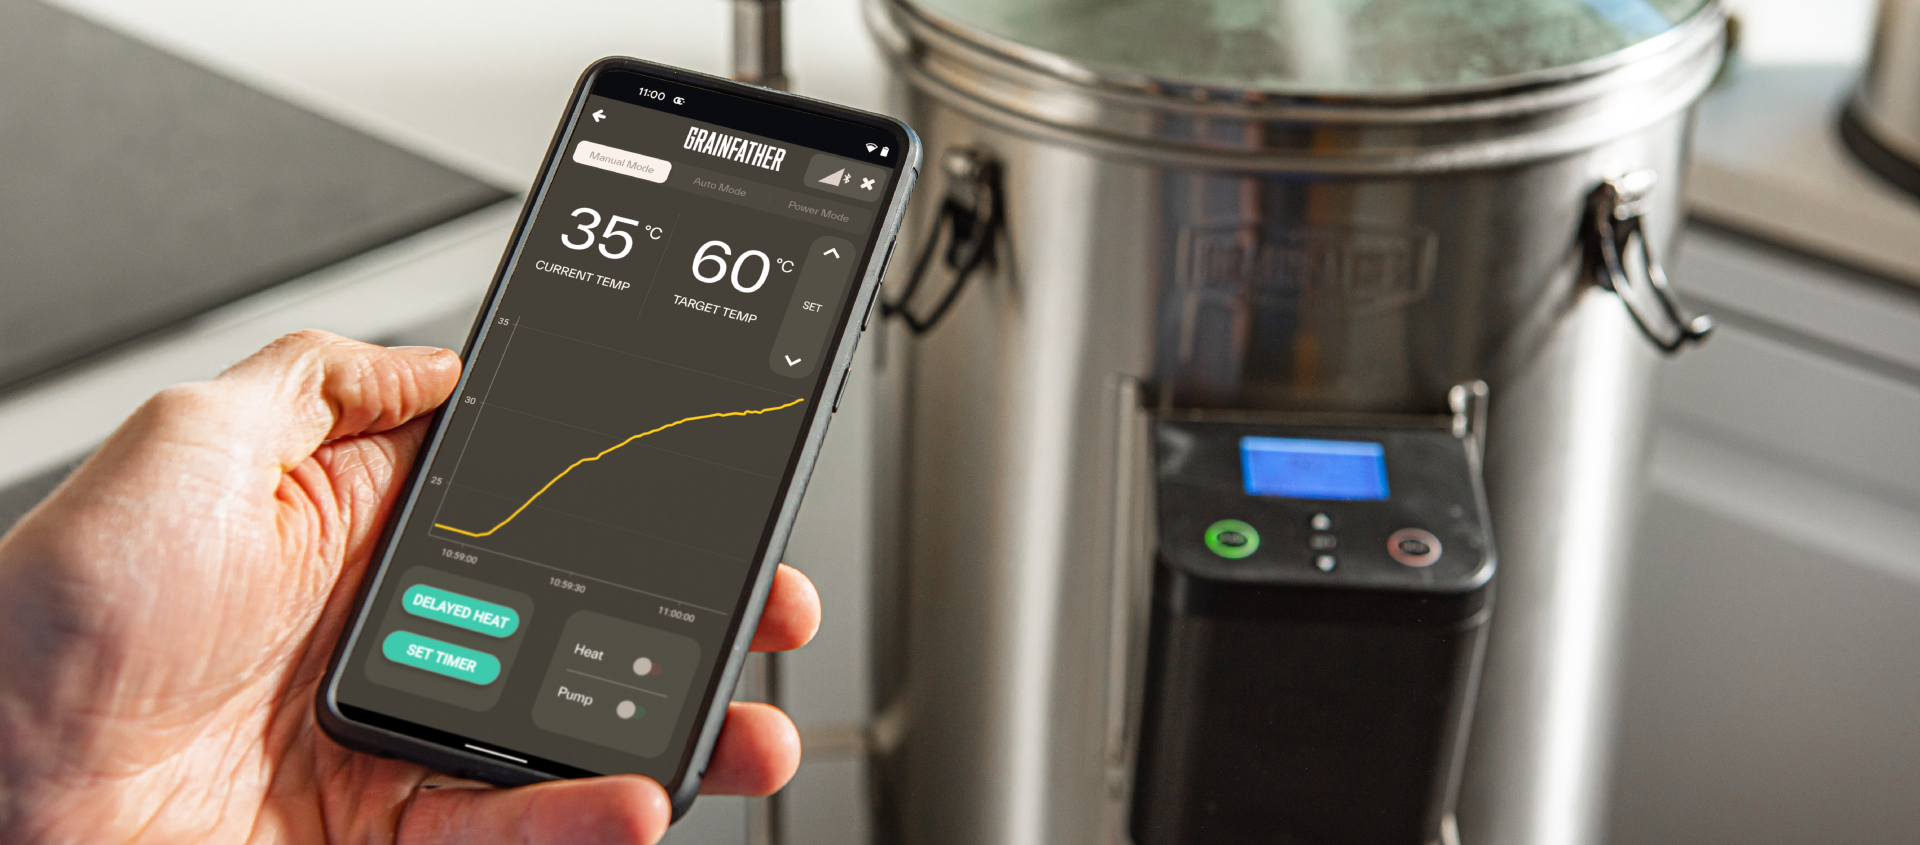 Hand Holding Mobile Phone with Grainfather Brewing App Next to G30 Brewing System